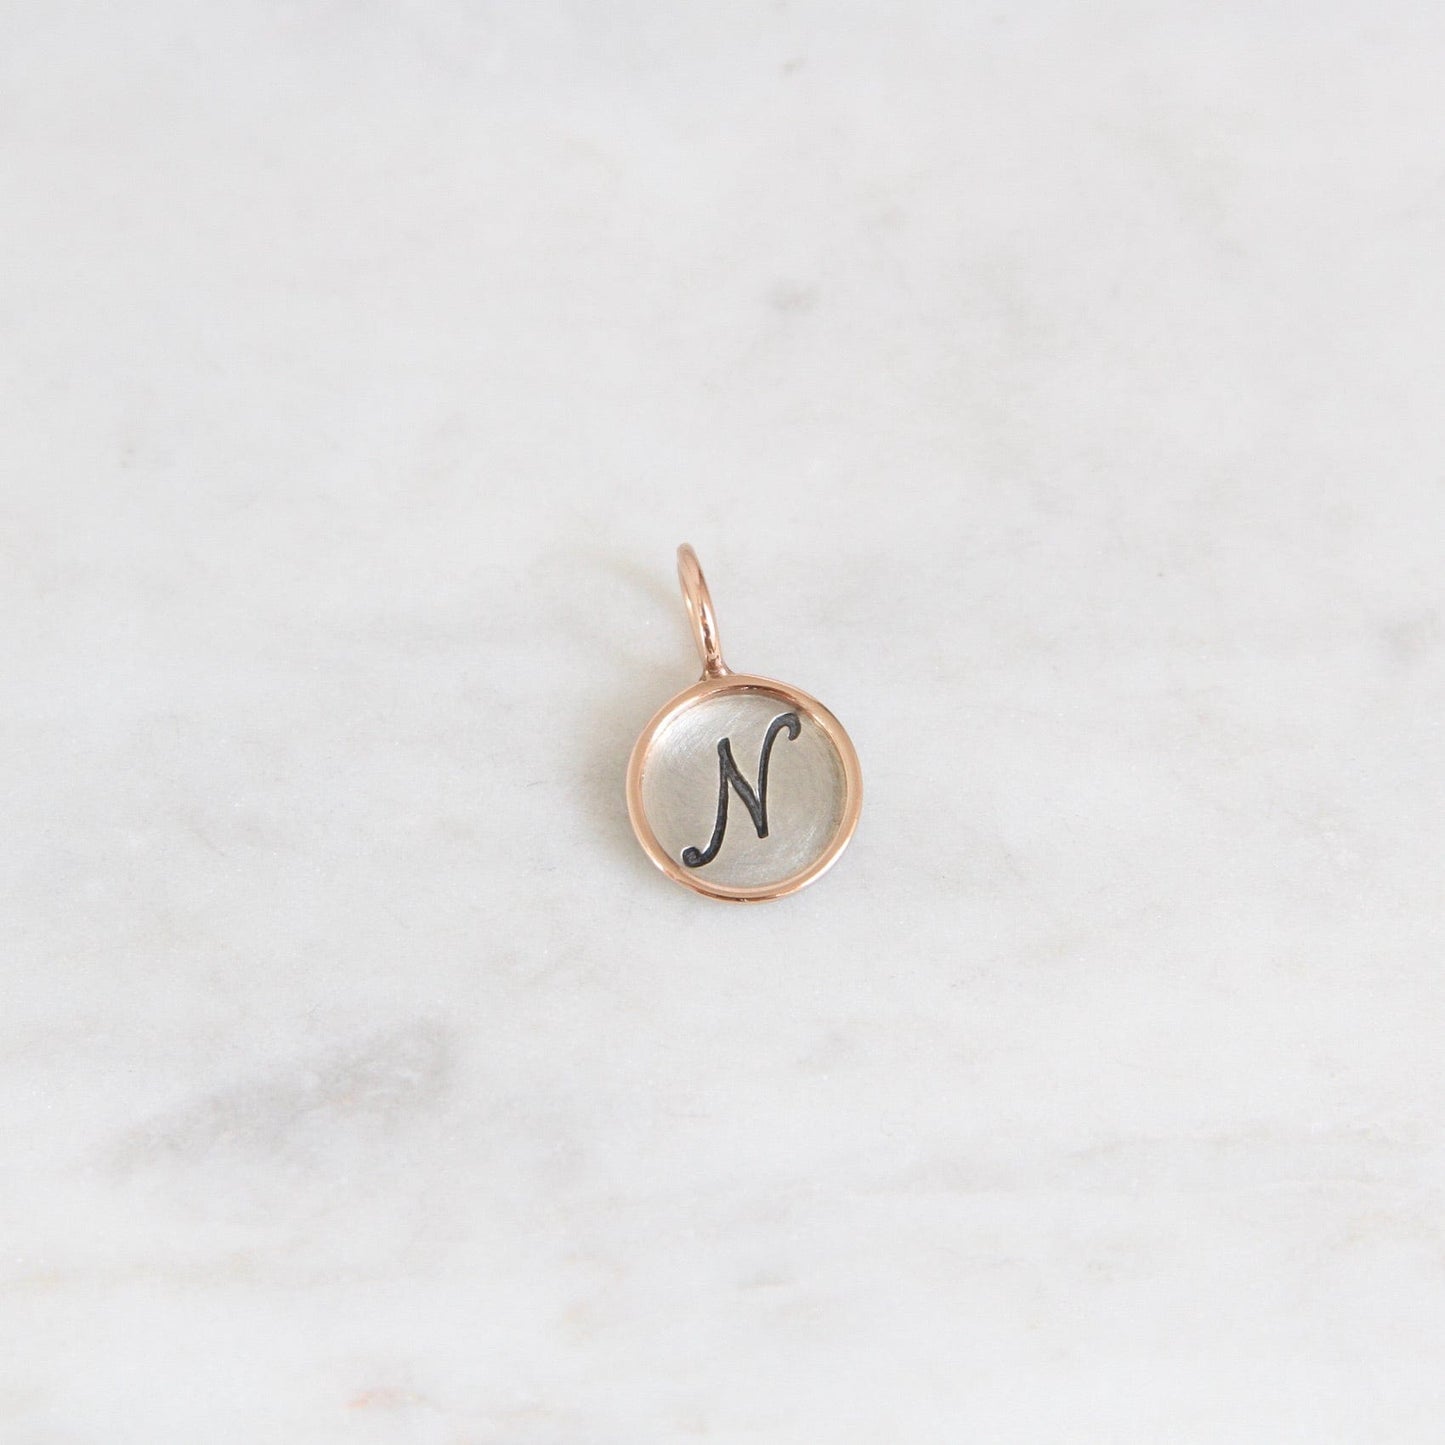 CHM Sterling Silver "N" Round Charm with 14K Rose Gold Frame